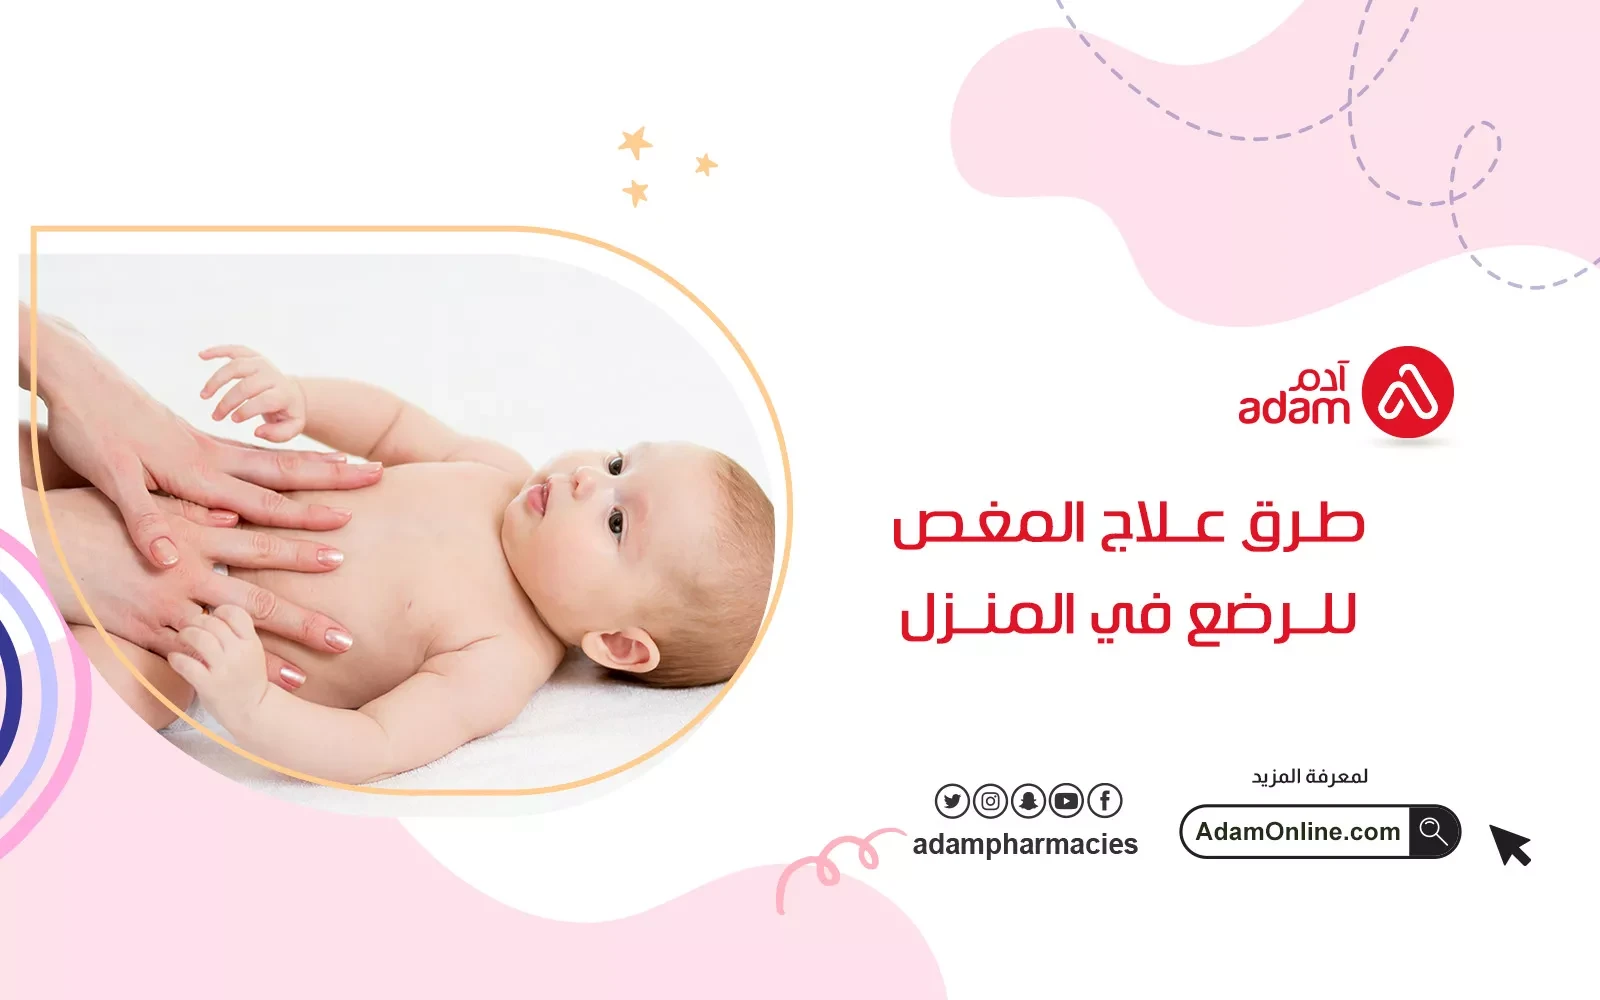 Methods of treating colic for infants at home